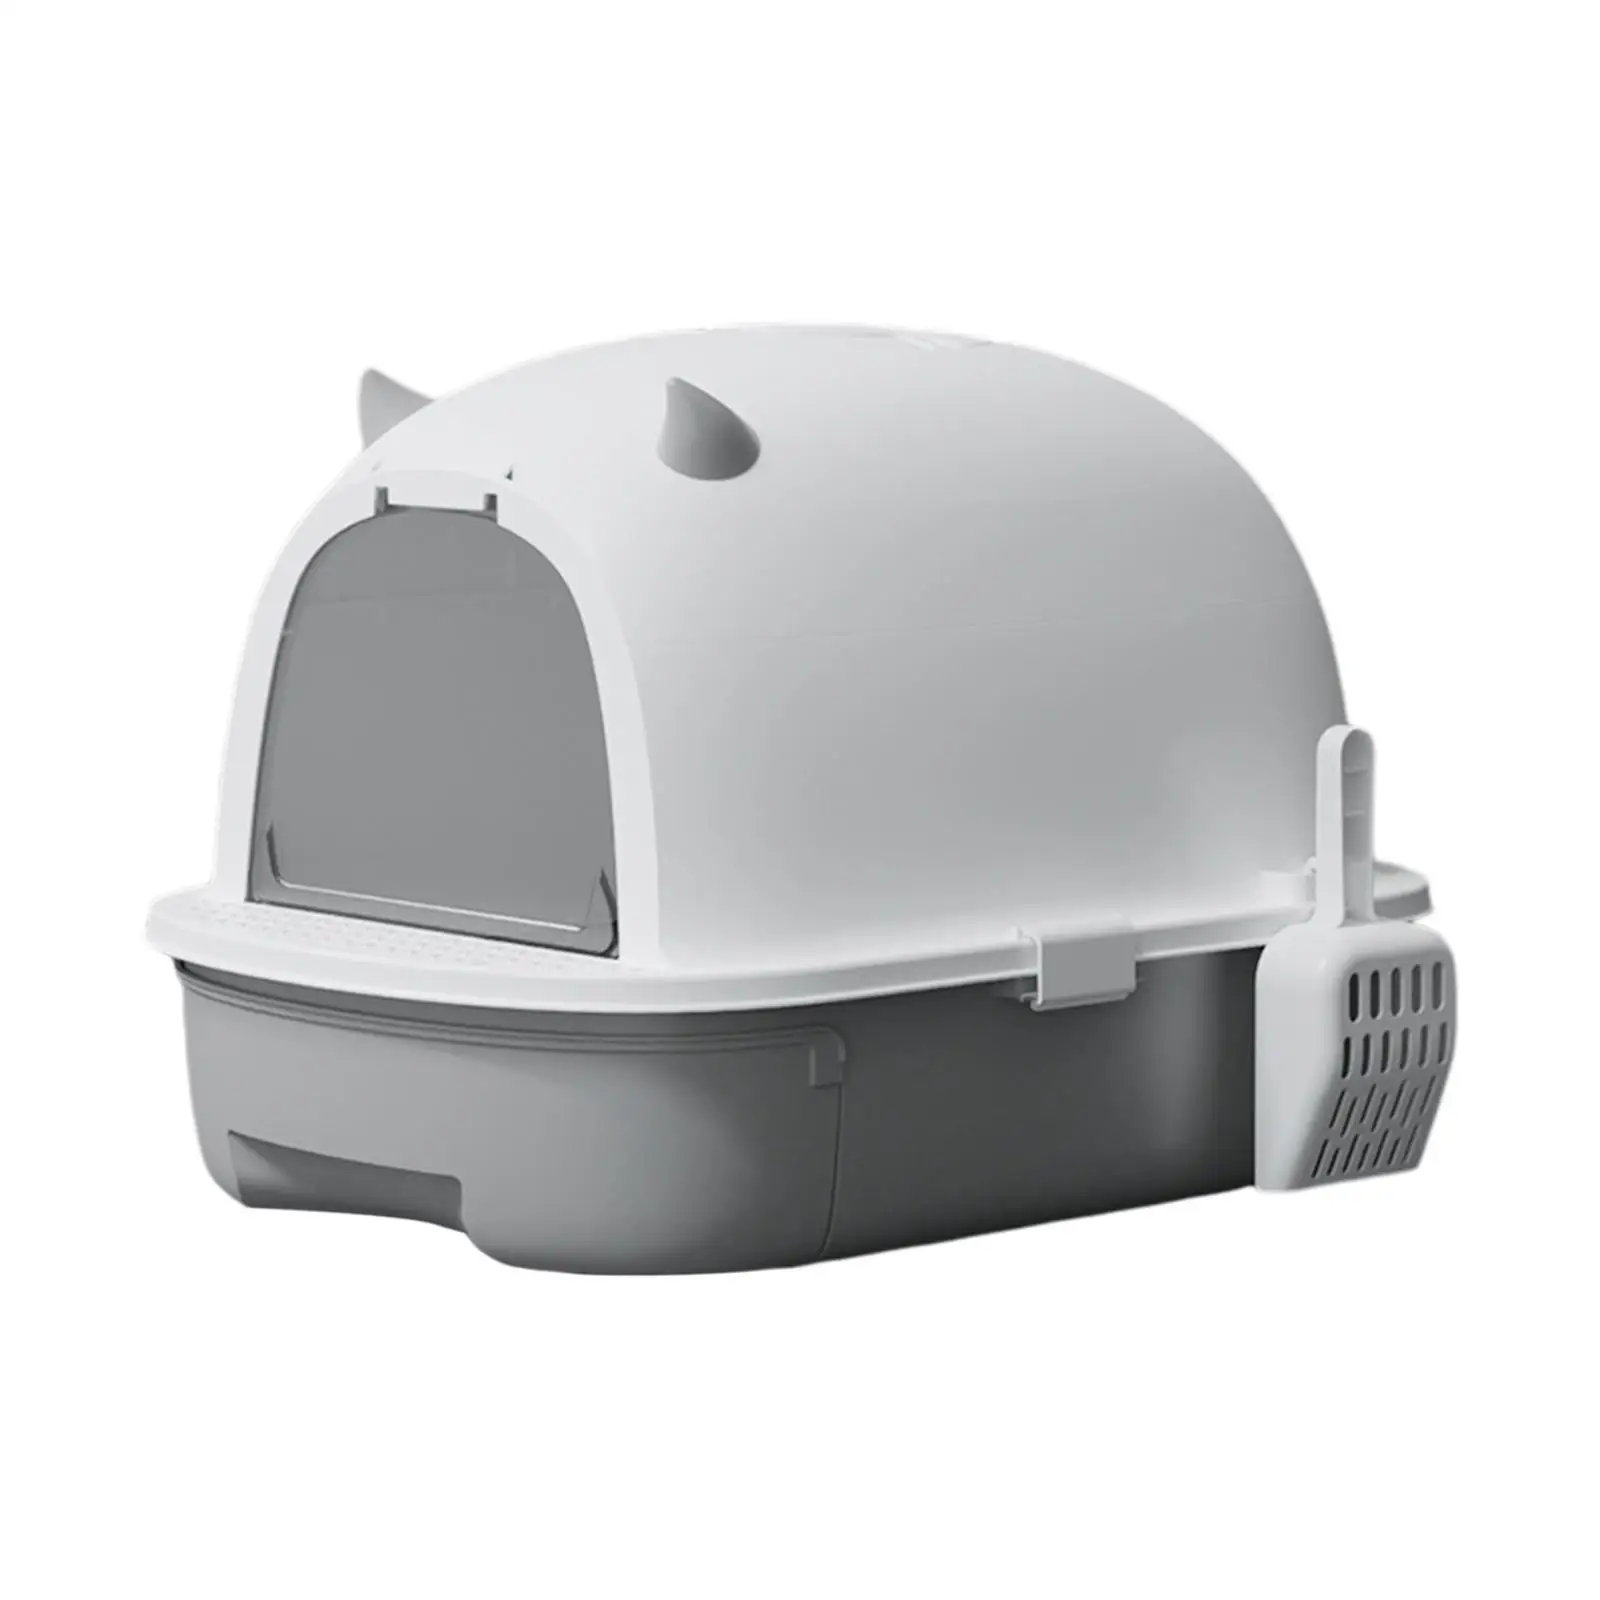 Hooded Cat with Lid Hooded Cat Litter Tray Large Fully Enclosed Cat Toilet Removable Durable Pet with Lid Kitten Potty